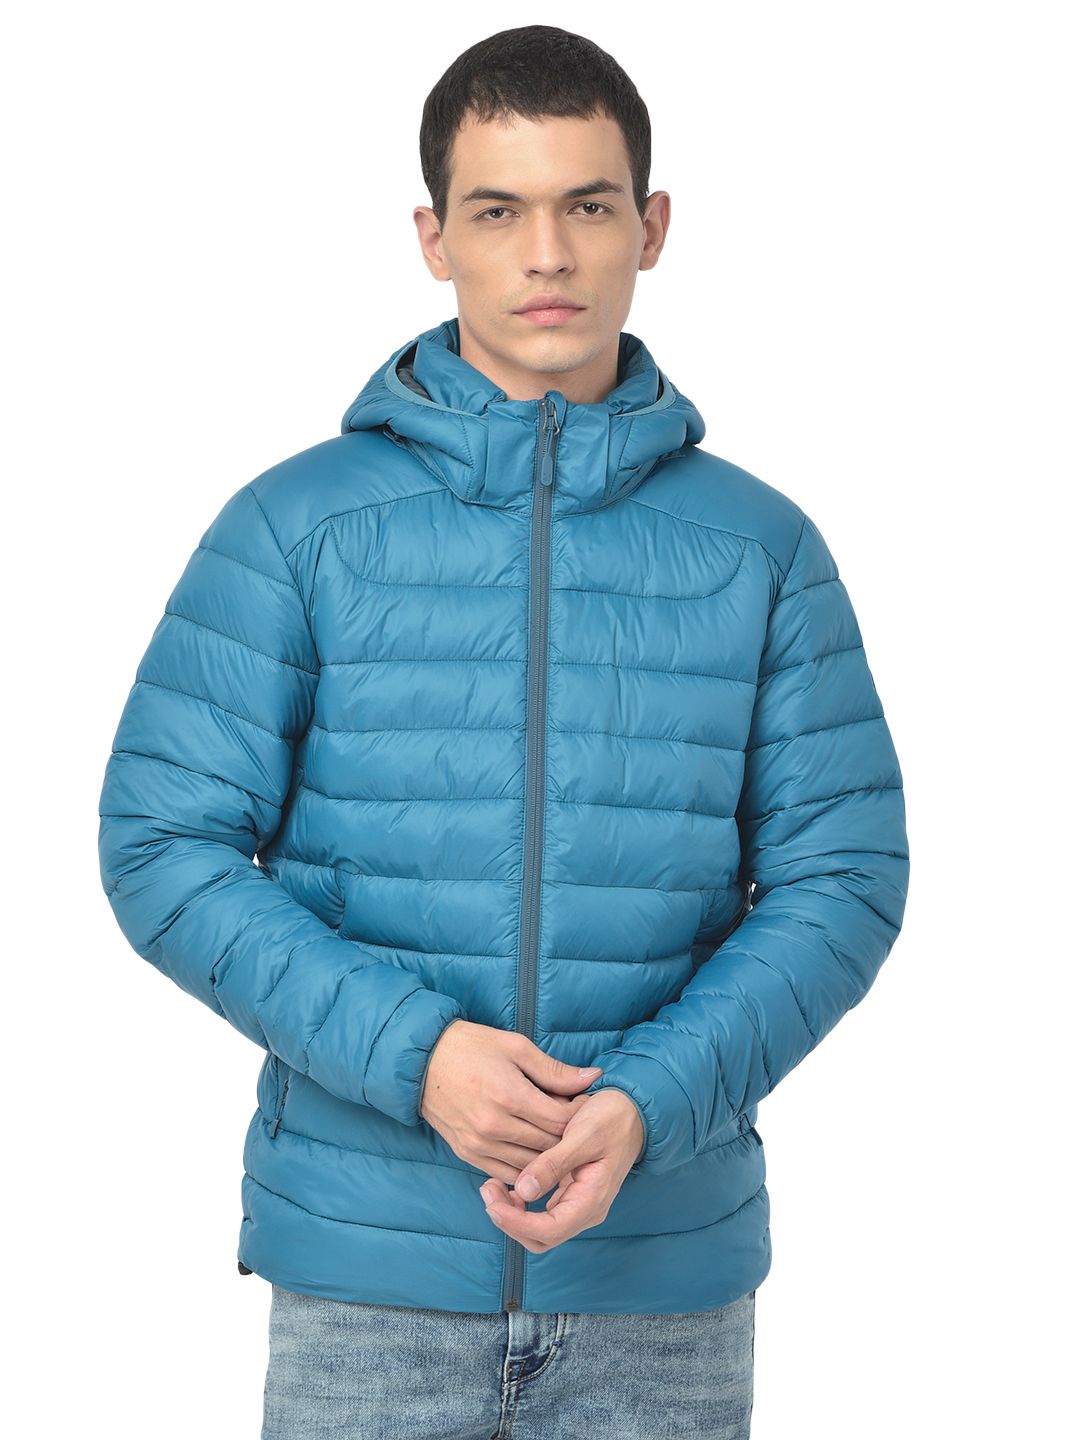 Woodland Puffer jackets for Men sale - discounted price | FASHIOLA INDIA-thanhphatduhoc.com.vn